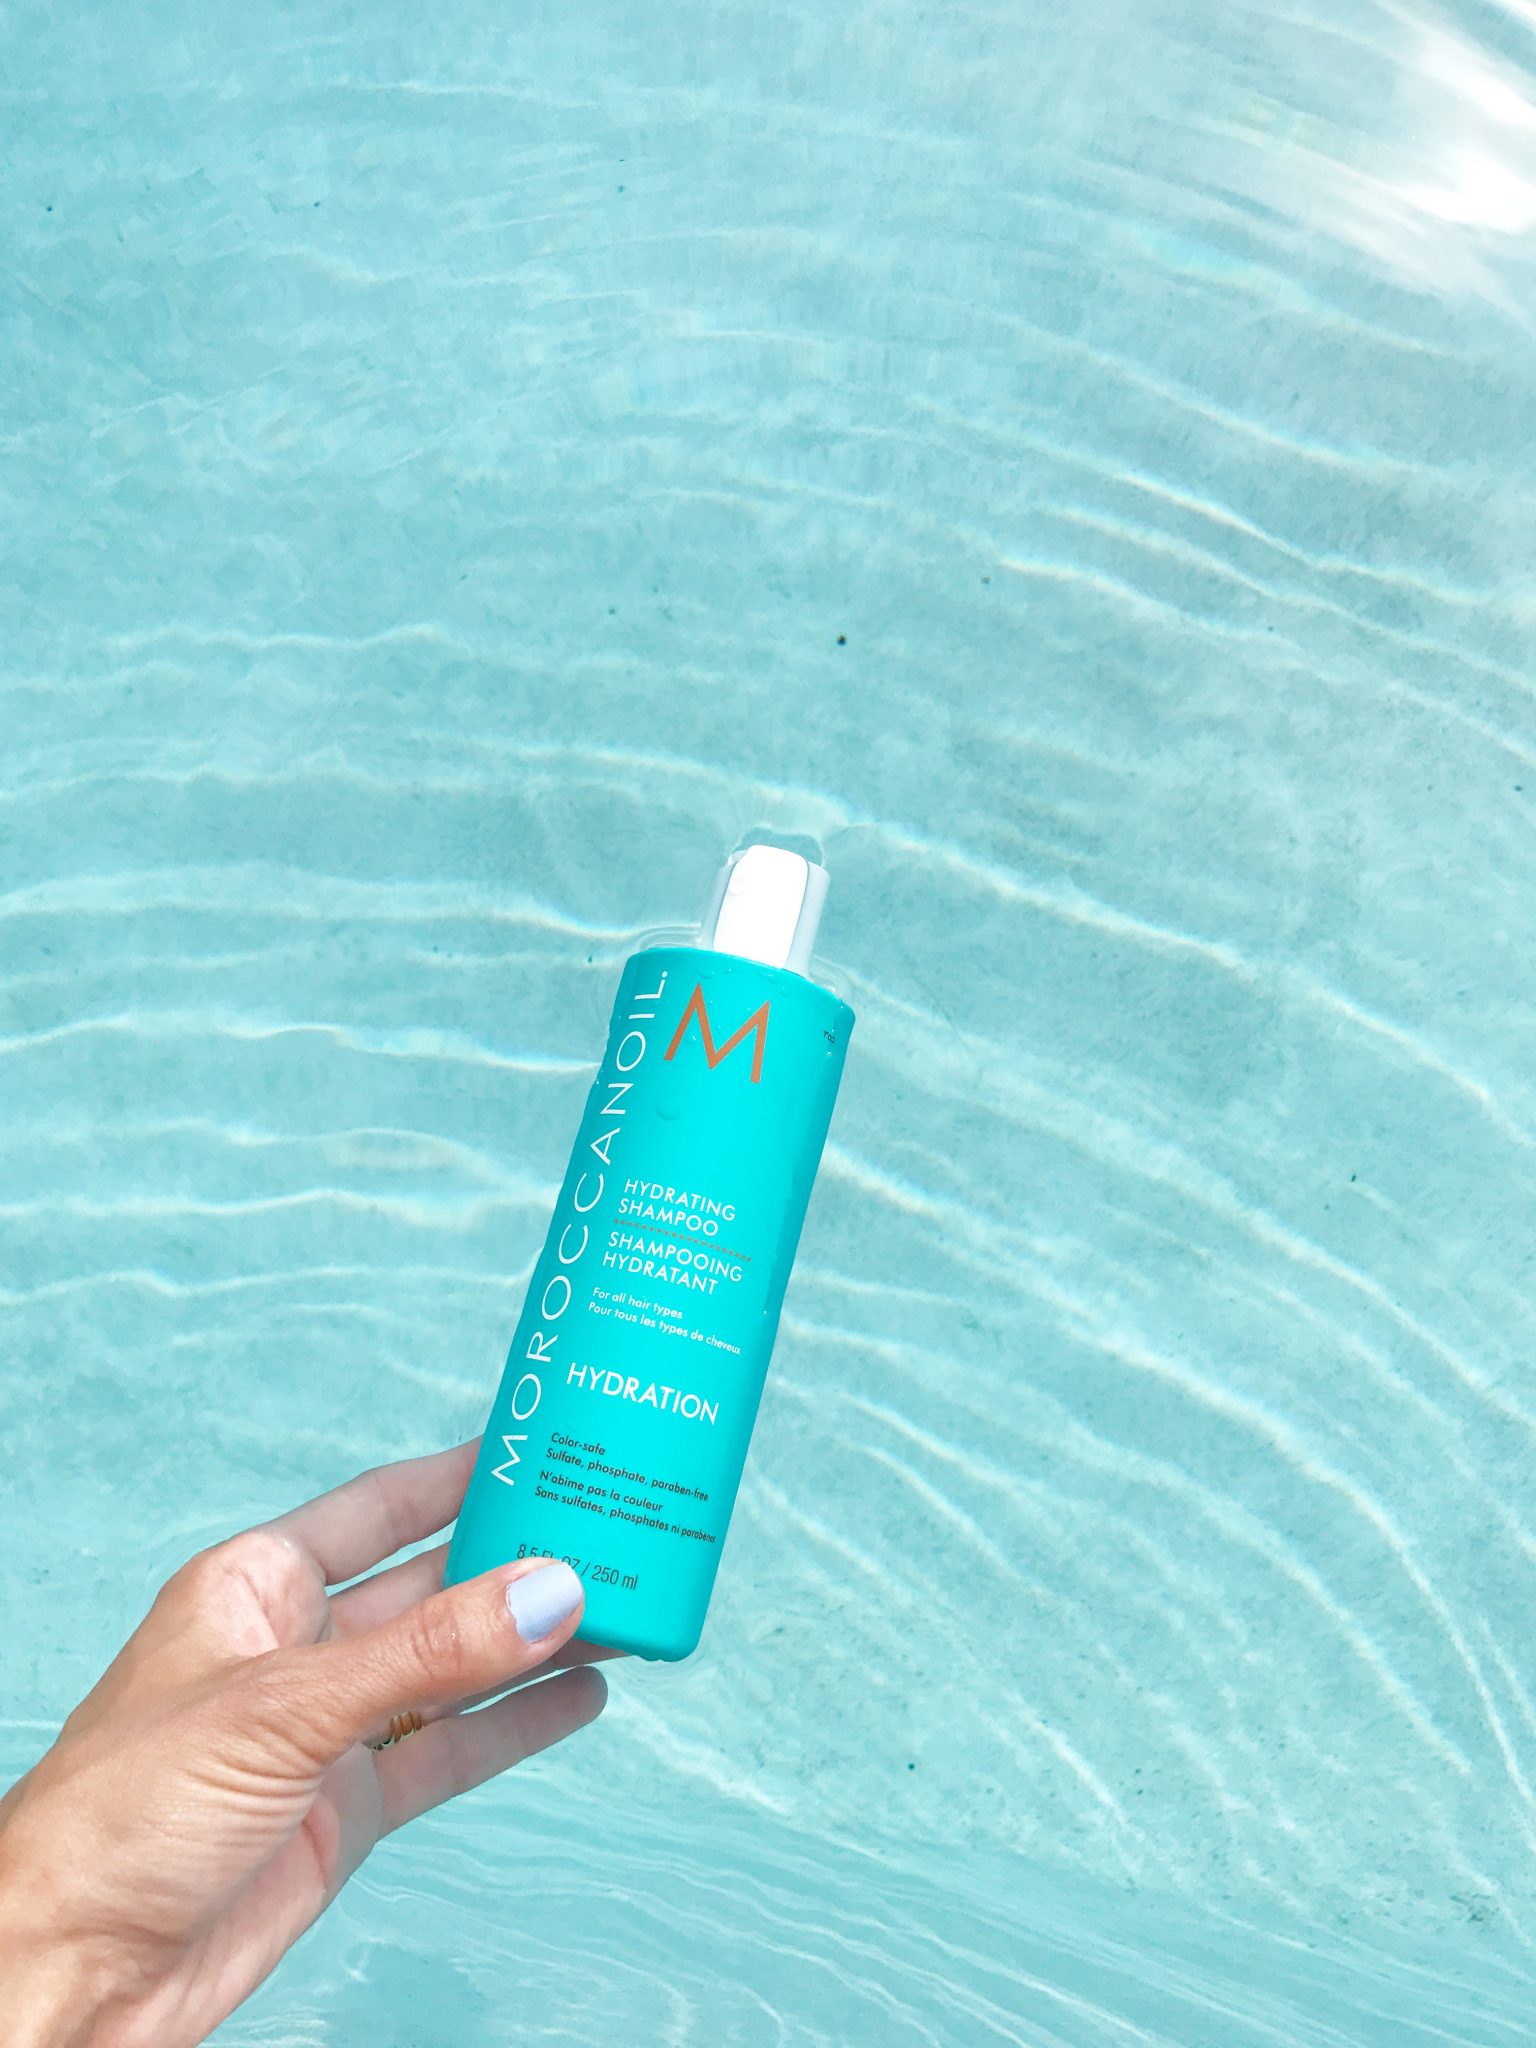 Moroccanoil Love Is in the Hair Hydration Set review